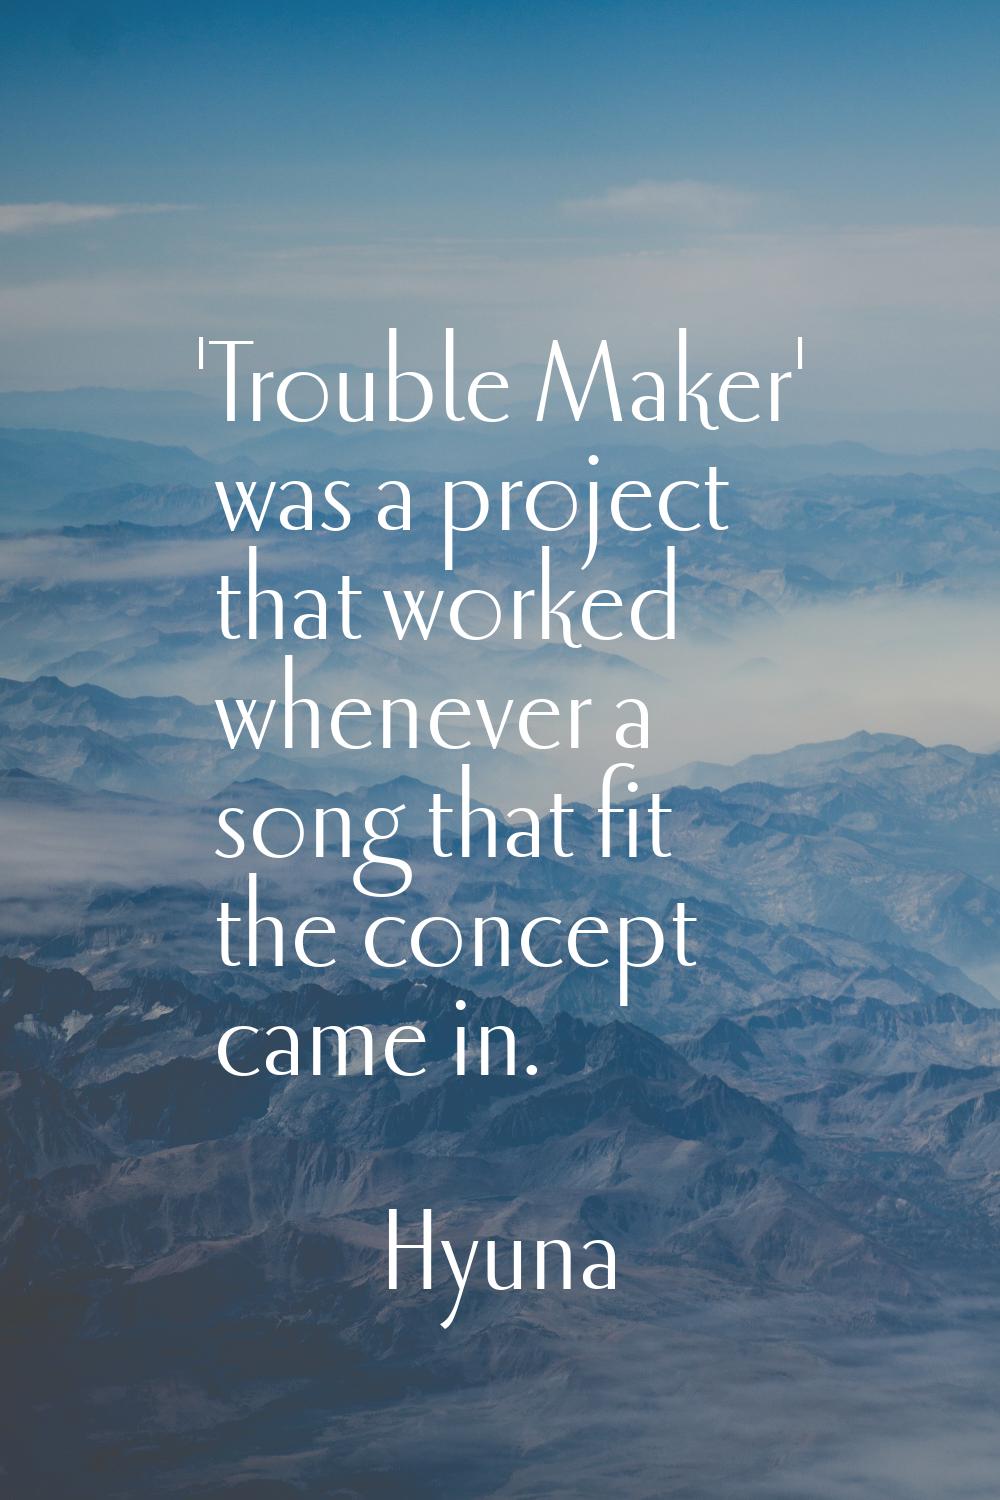 'Trouble Maker' was a project that worked whenever a song that fit the concept came in.